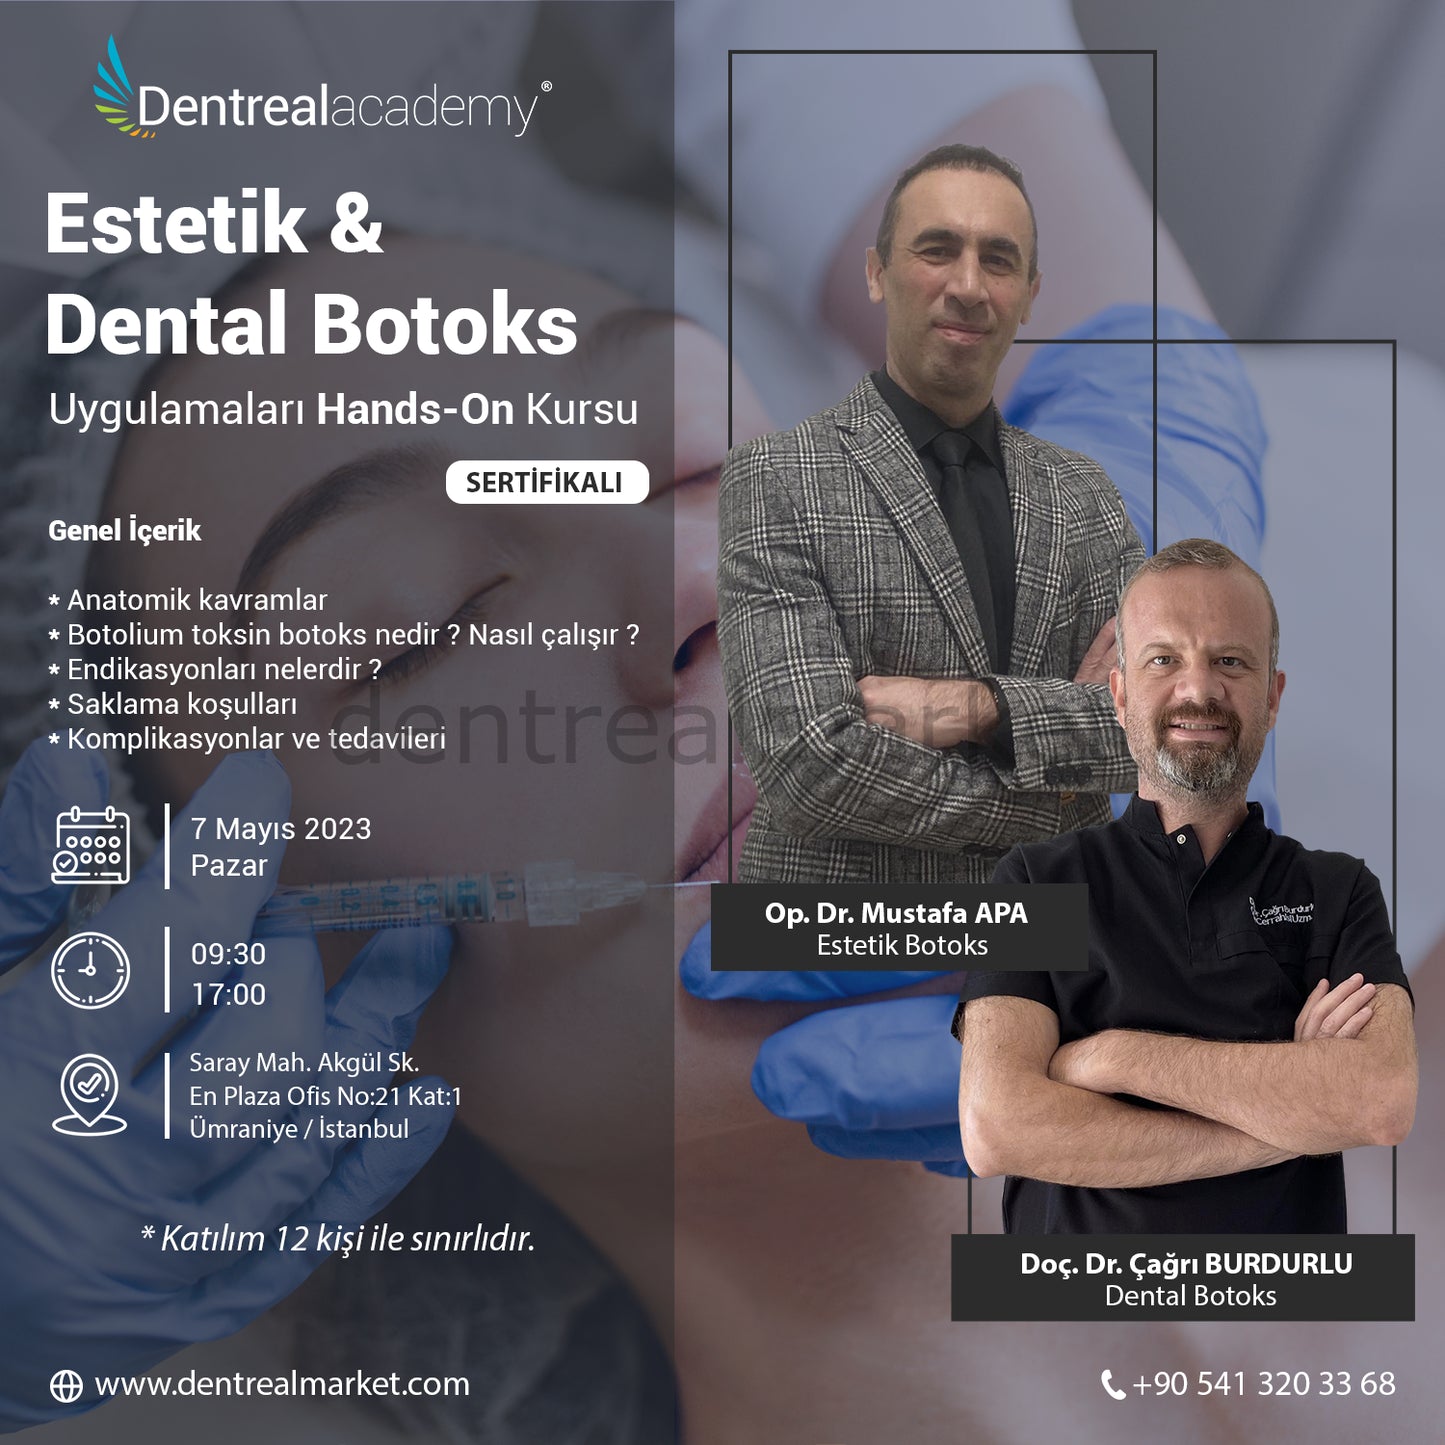 Aesthetic and Dental Botox Applications Hands-On Training